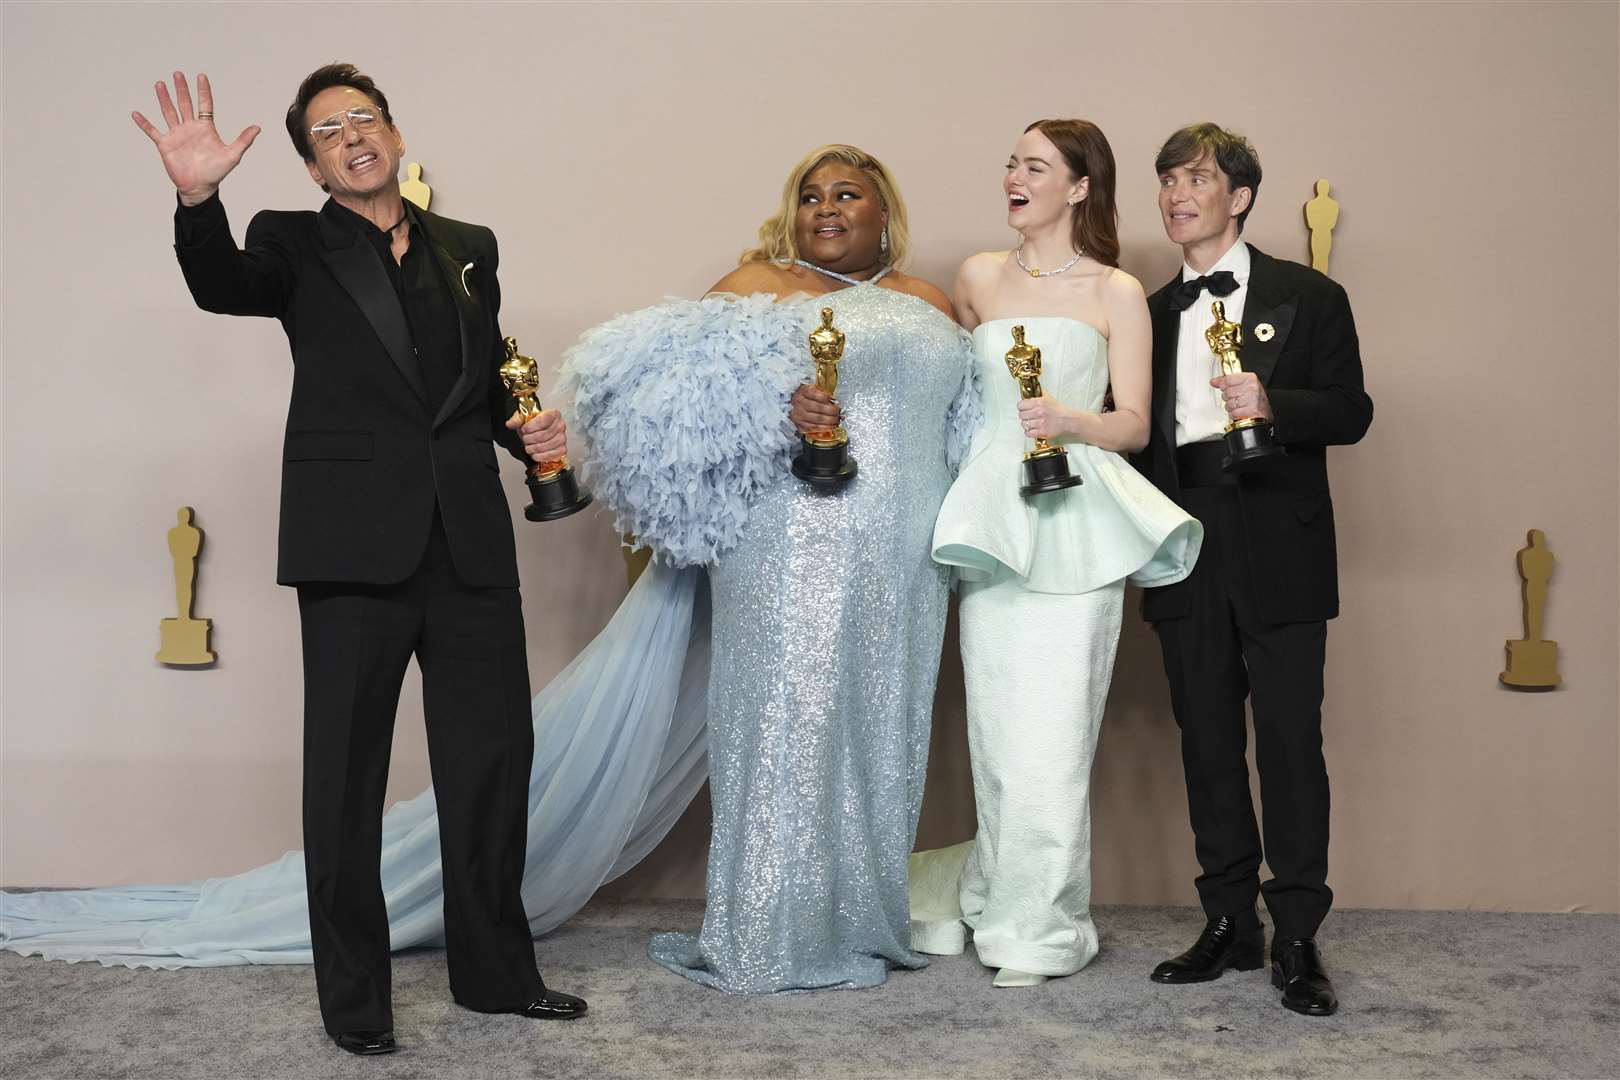 (L to R) Robert Downey Jr, best supporting actor, Oppenheimer; Da’Vine Joy Randolph, best supporting actress, The Holdovers; Emma Stone, best actress, Poor Things; and Cillian Murphy, best actor, Oppenheimer (Jordan Strauss/Invision/AP)